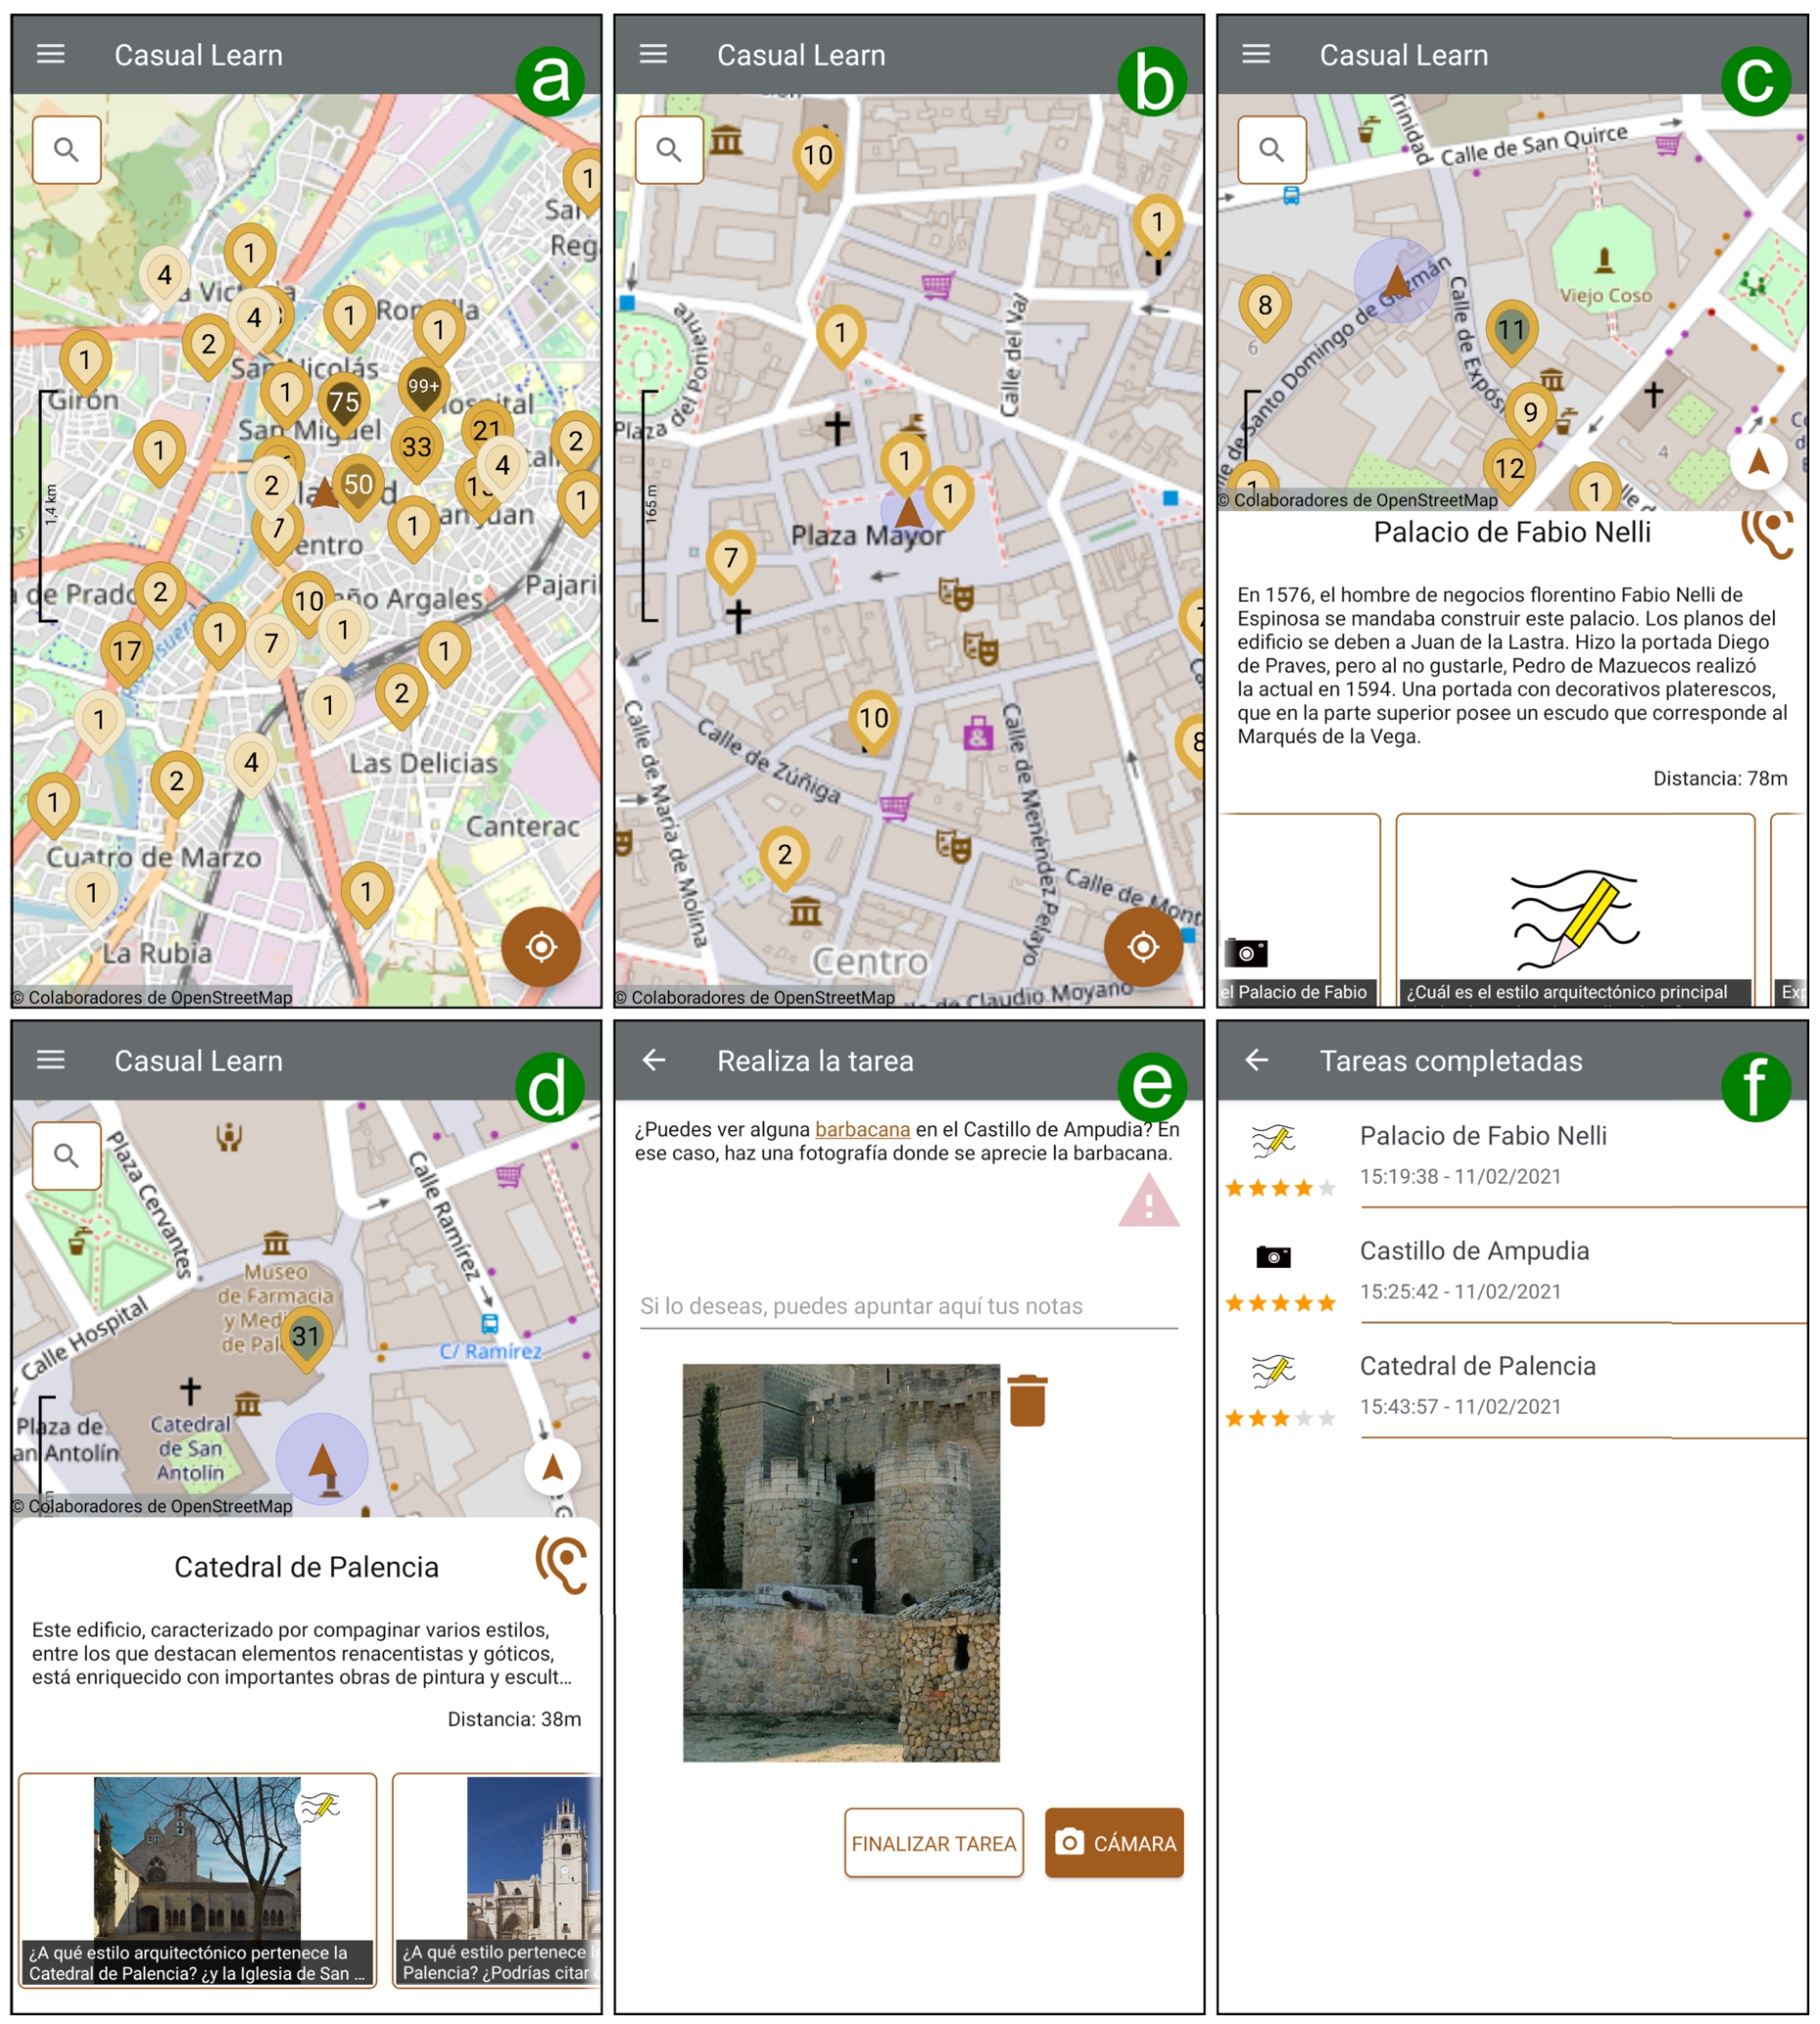 Snapshots of the user interface of Casual Learn. (a) View of the city of Valladolid with pins showing the position of Cultural Heritage sites (numbers inside pins represent the number of available tasks related to the corresponding site). (b) View of the city center of Valladolid with pins showing the position of Cultural Heritage sites (numbers inside pins represent the number of available tasks related to the corresponding site). (c) Description of the context of the Palace of Fabio Nelli (Palacio de Fabio Nelli). The view includes a map of the surroundings of the Palace of Fabio Nelli (upper part); a textual description of the palace (middle part); and the list of tasks related to this context (lower part). (d) Description of the Cultural Heritage Site of Palencia Cathedral (Catedral de Palencia). The view includes a map of the surroundings of the Palencia Cathedral (upper part); a textual description of the cathedral (middle part); and the list of tasks related to this context (lower part). (e) Description of a task related to the Castle of Ampudia. The view includes the task textual description in its upper part (“Can you see a barbican in the Castle of Ampudia? If you can, take a photo in which the barbican is depicted.”); then it provides access to the camera, so the learner can take a photo. (f) View of the learner portfolio where three answers are listed.